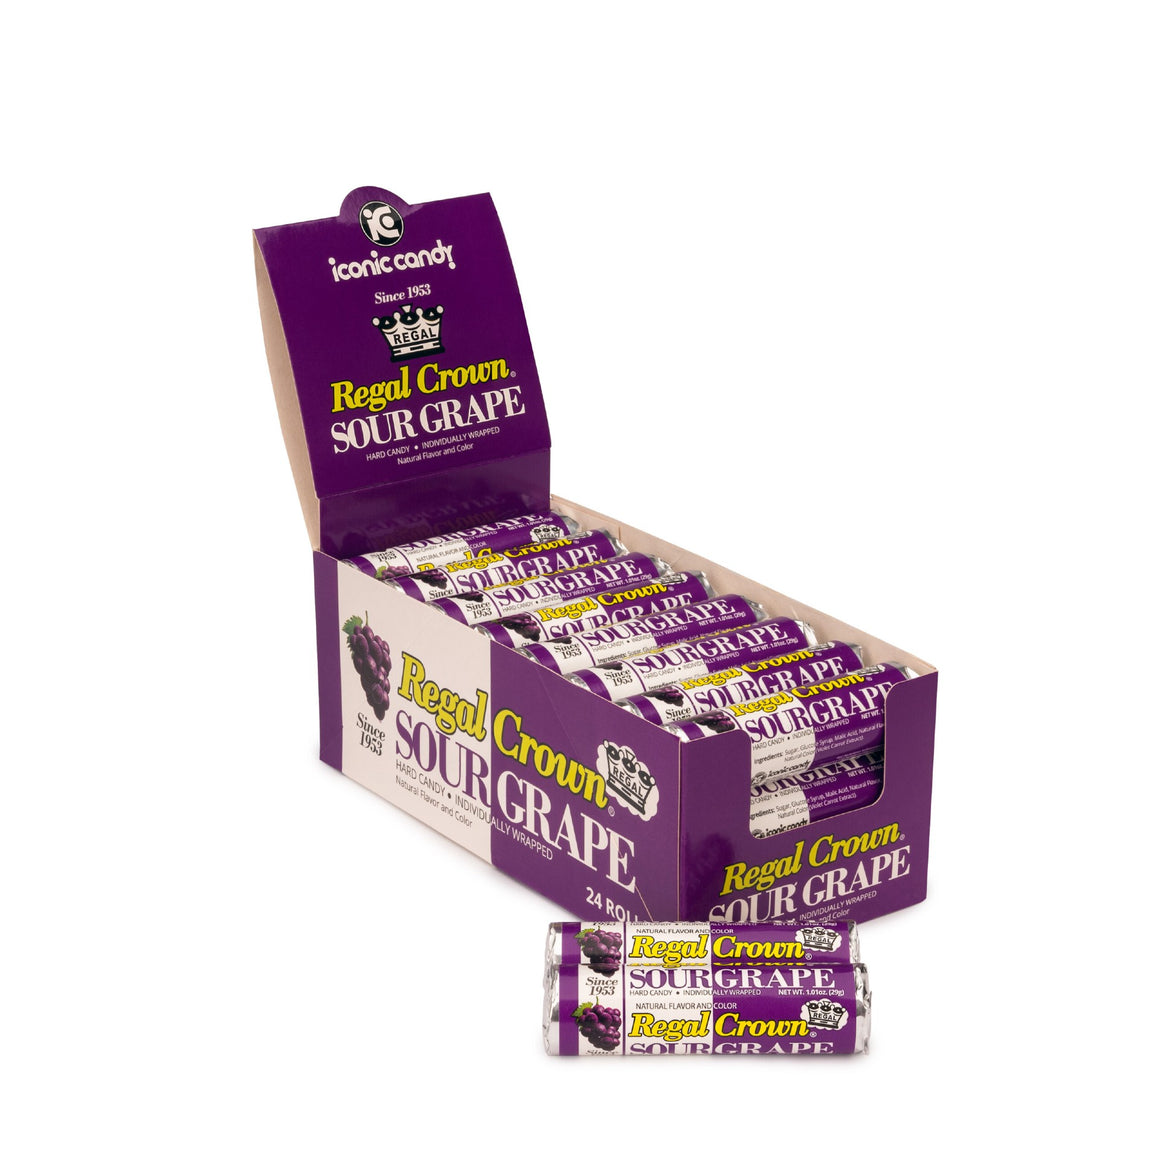 All City Candy Regal Crown Sour Grape 1.01 oz. Rolls 1 Roll Hard Candy Iconic Candy For fresh candy and great service, visit www.allcitycandy.com